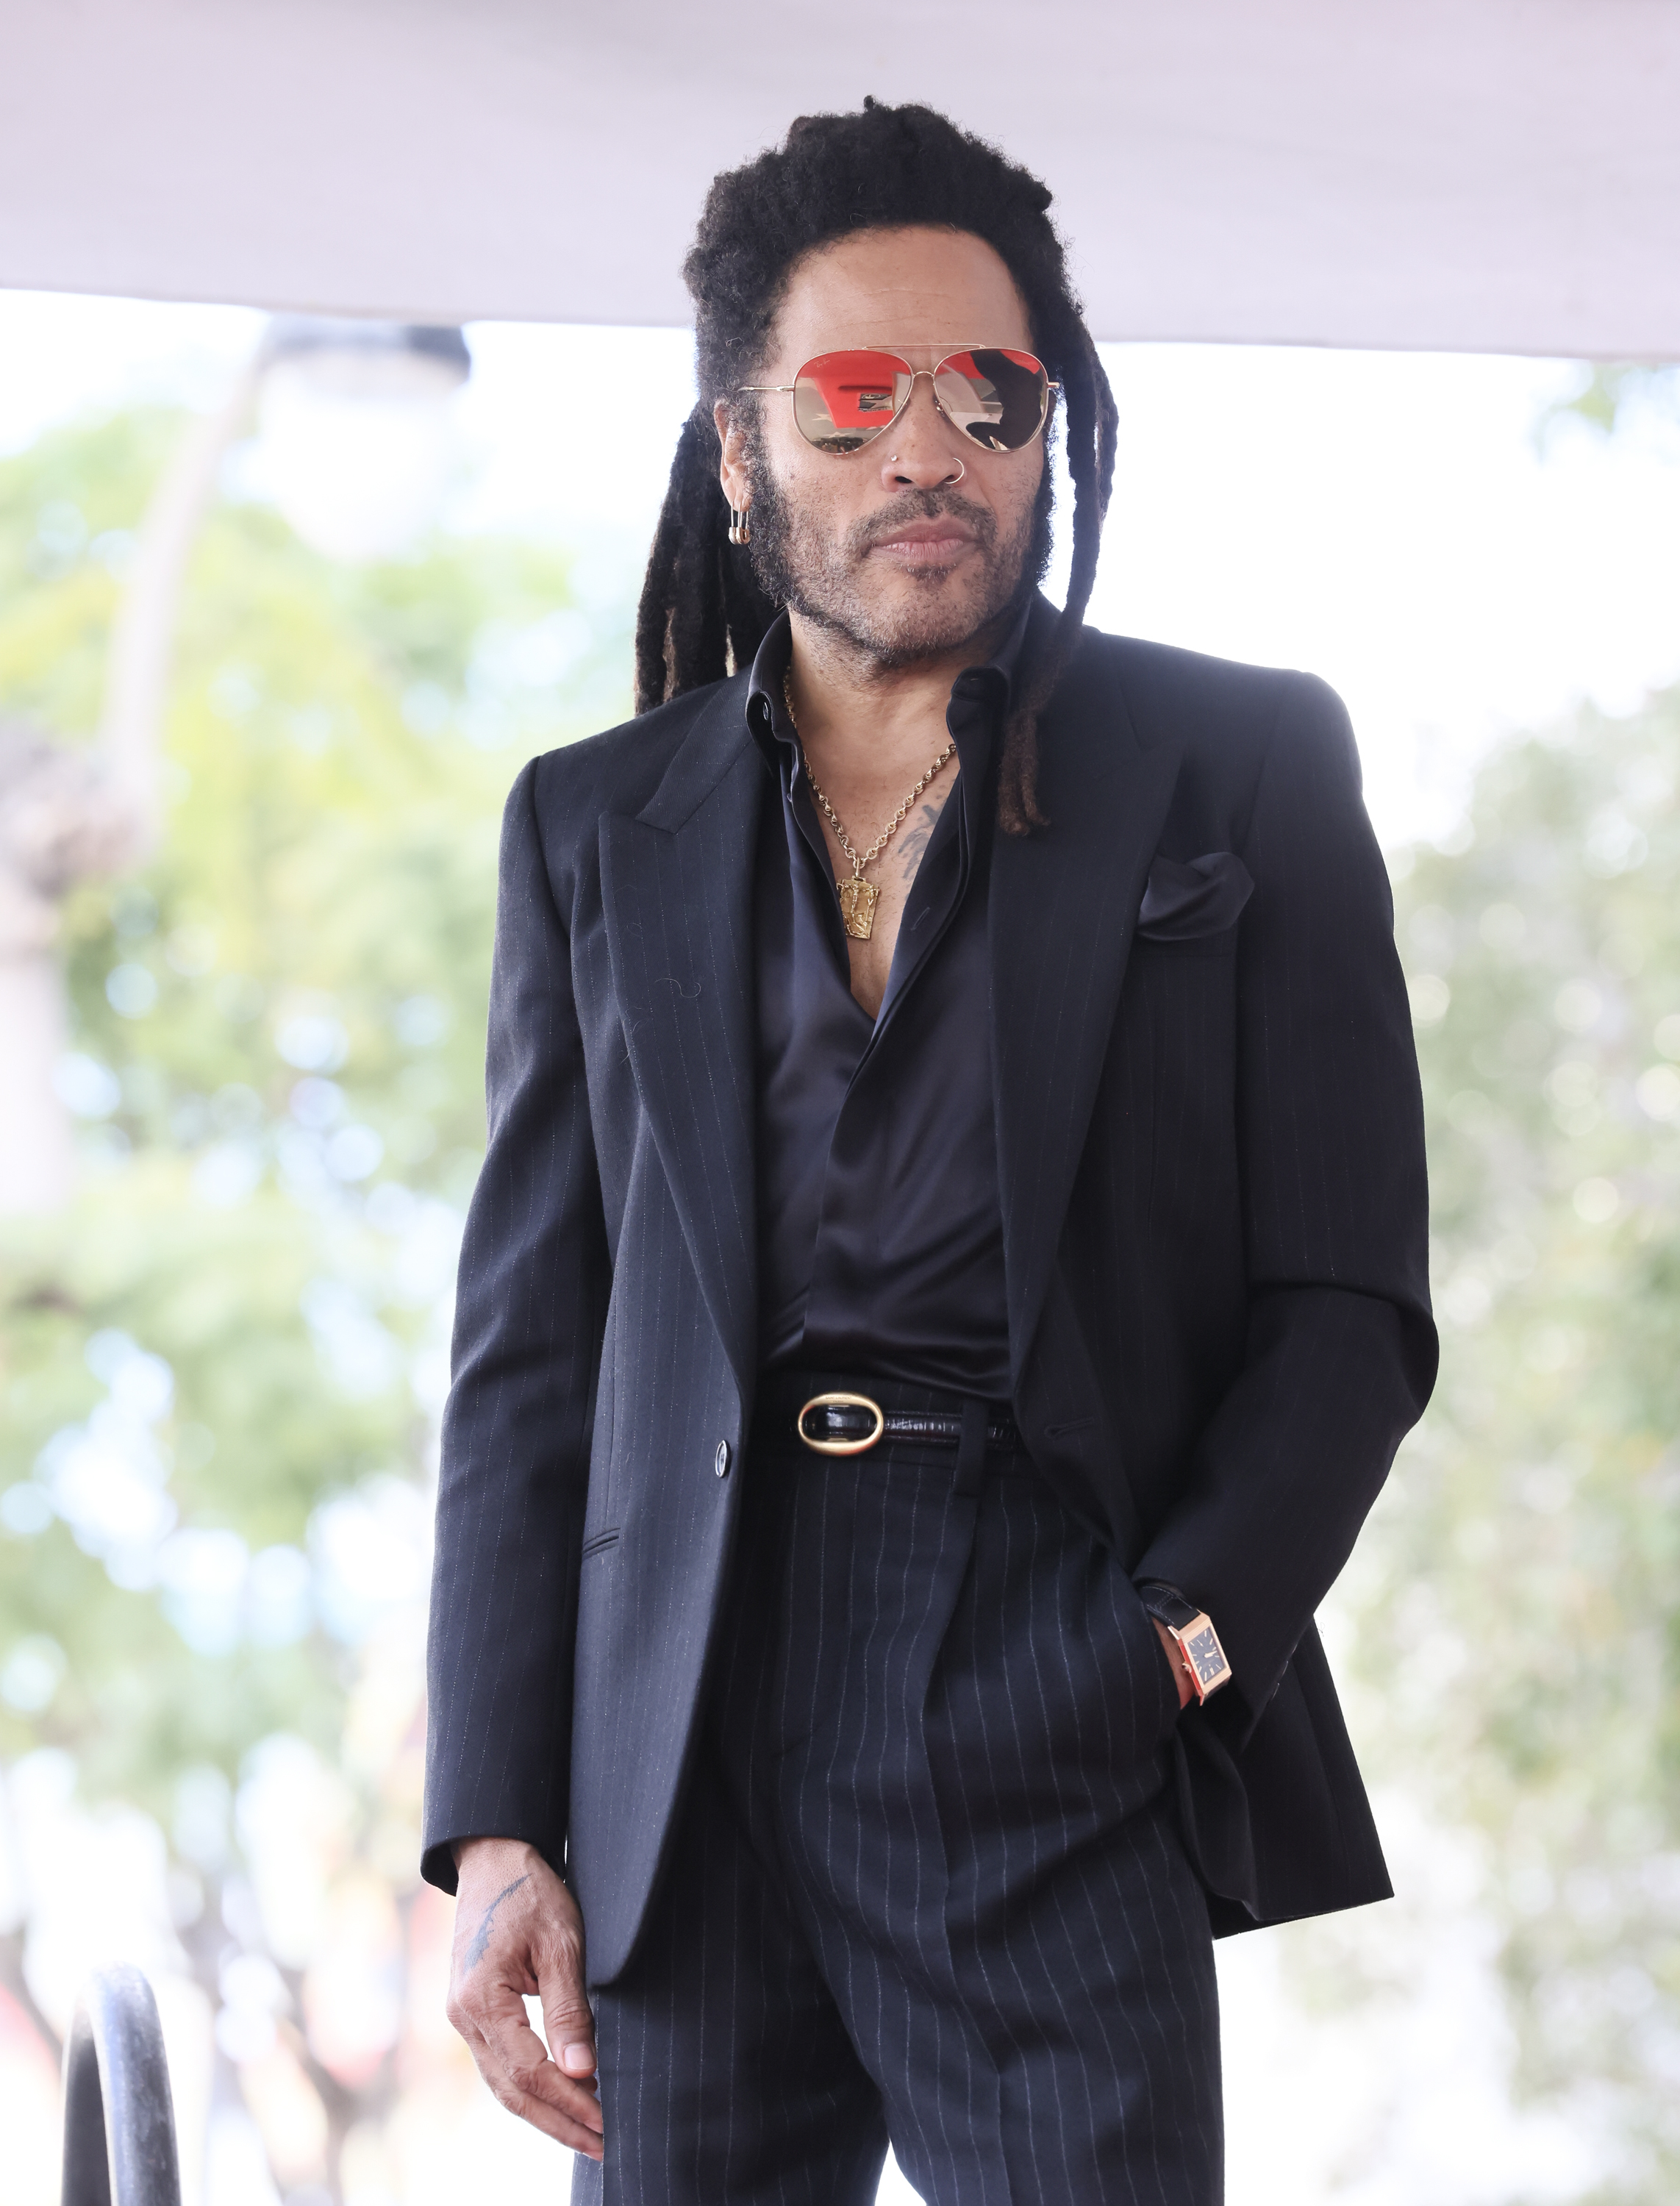 Man in a tailored suit with dreadlocks at an outdoor event, wearing sunglasses